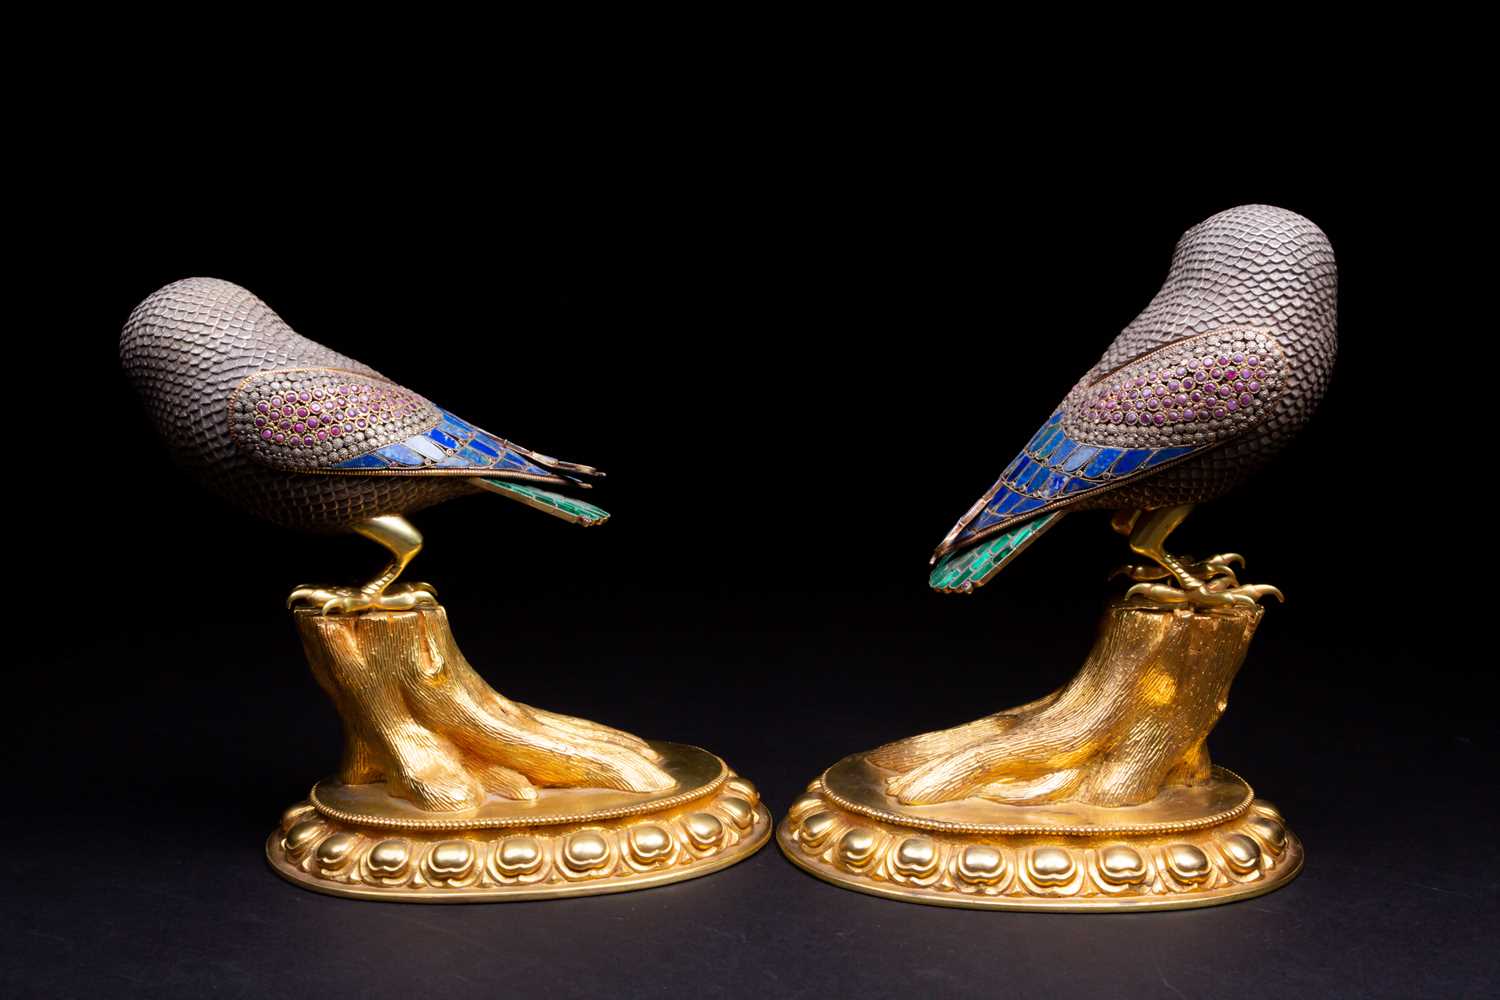 A large pair of silver and silver gilt owls, 20th century, with gilt beak and brows, one with - Image 4 of 7